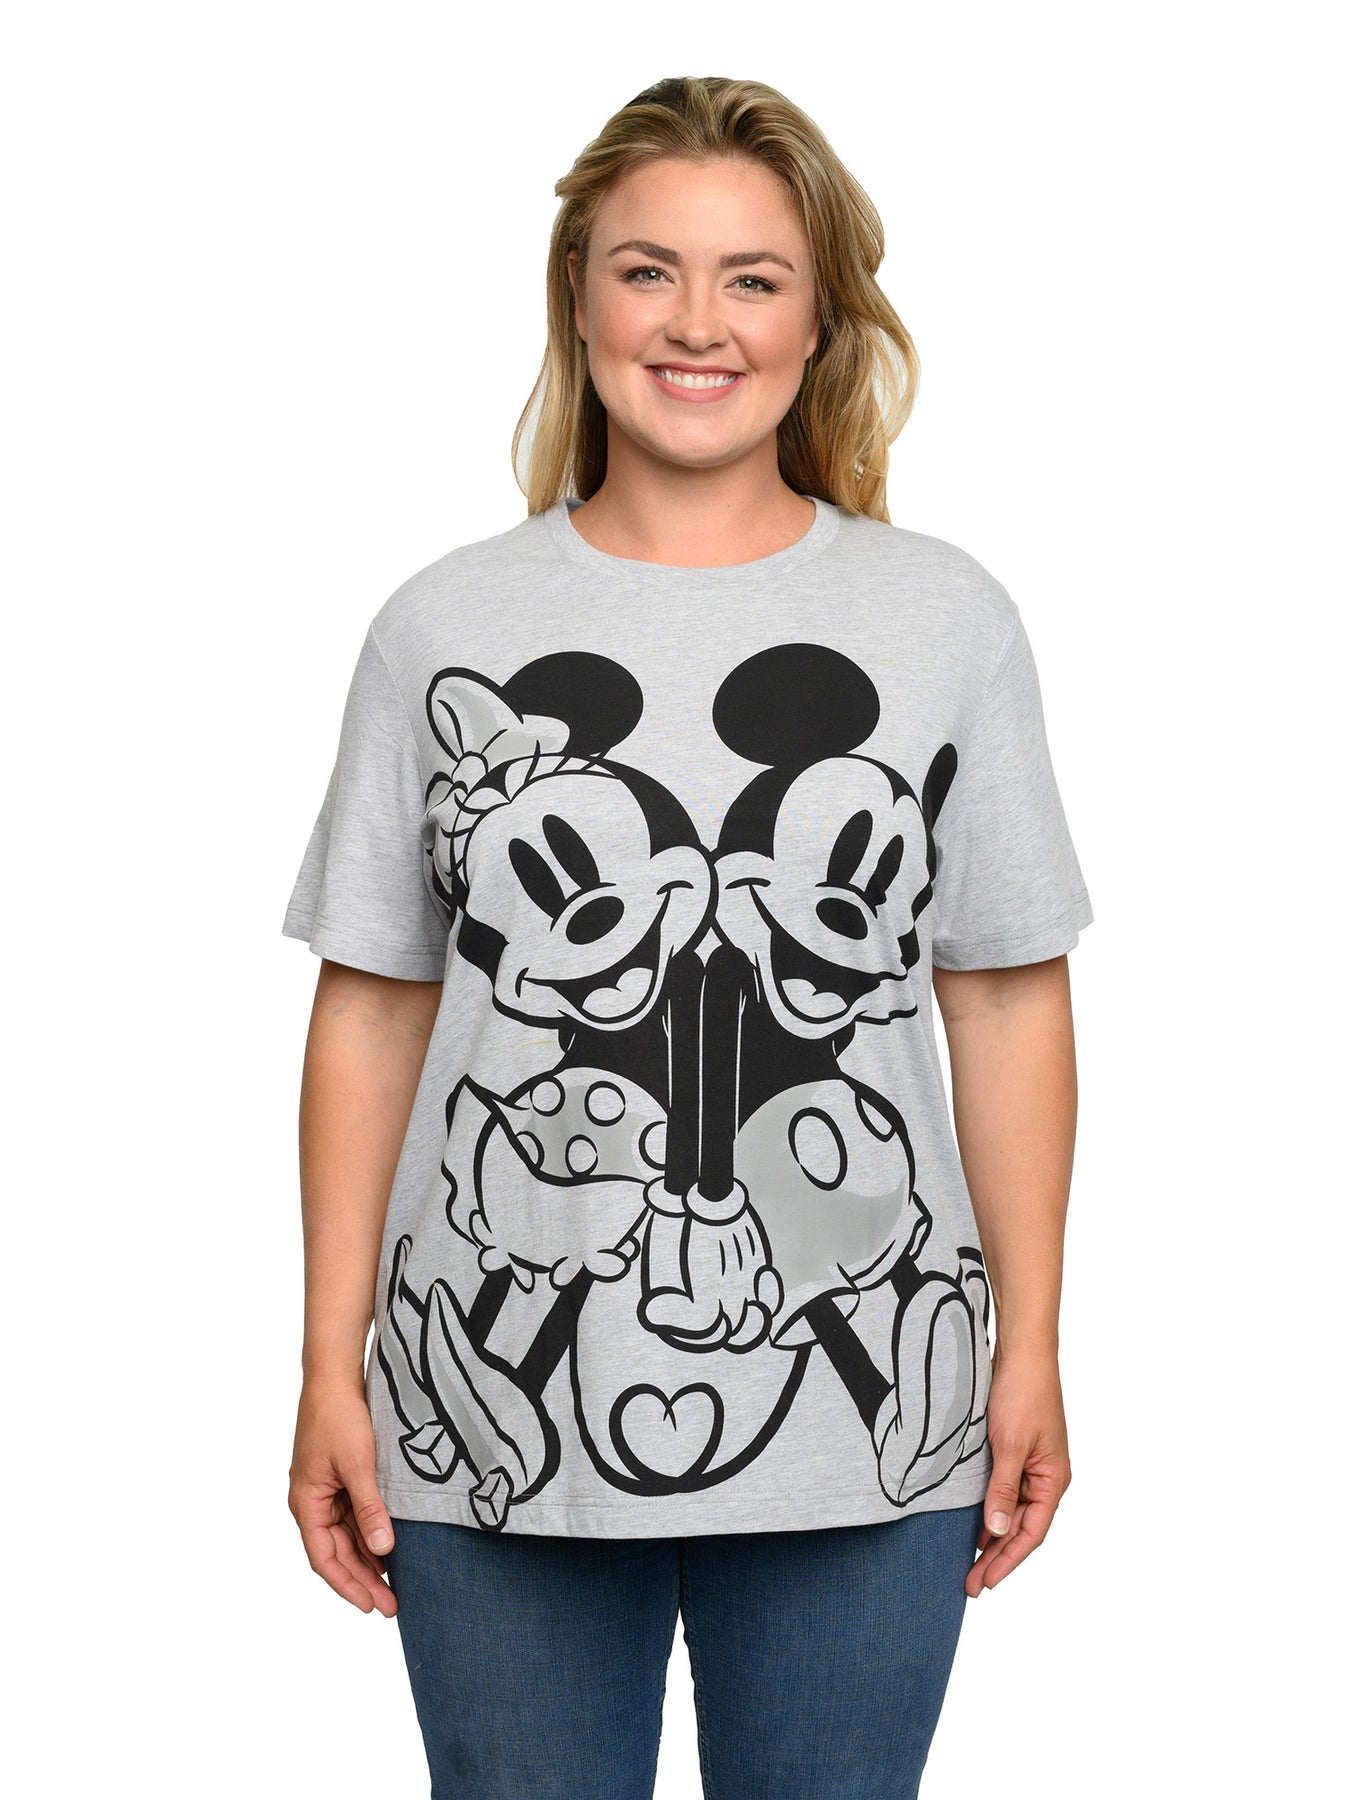 Mickey & Minnie Mouse T-Shirt Gray Back To Back Women's Plus Size